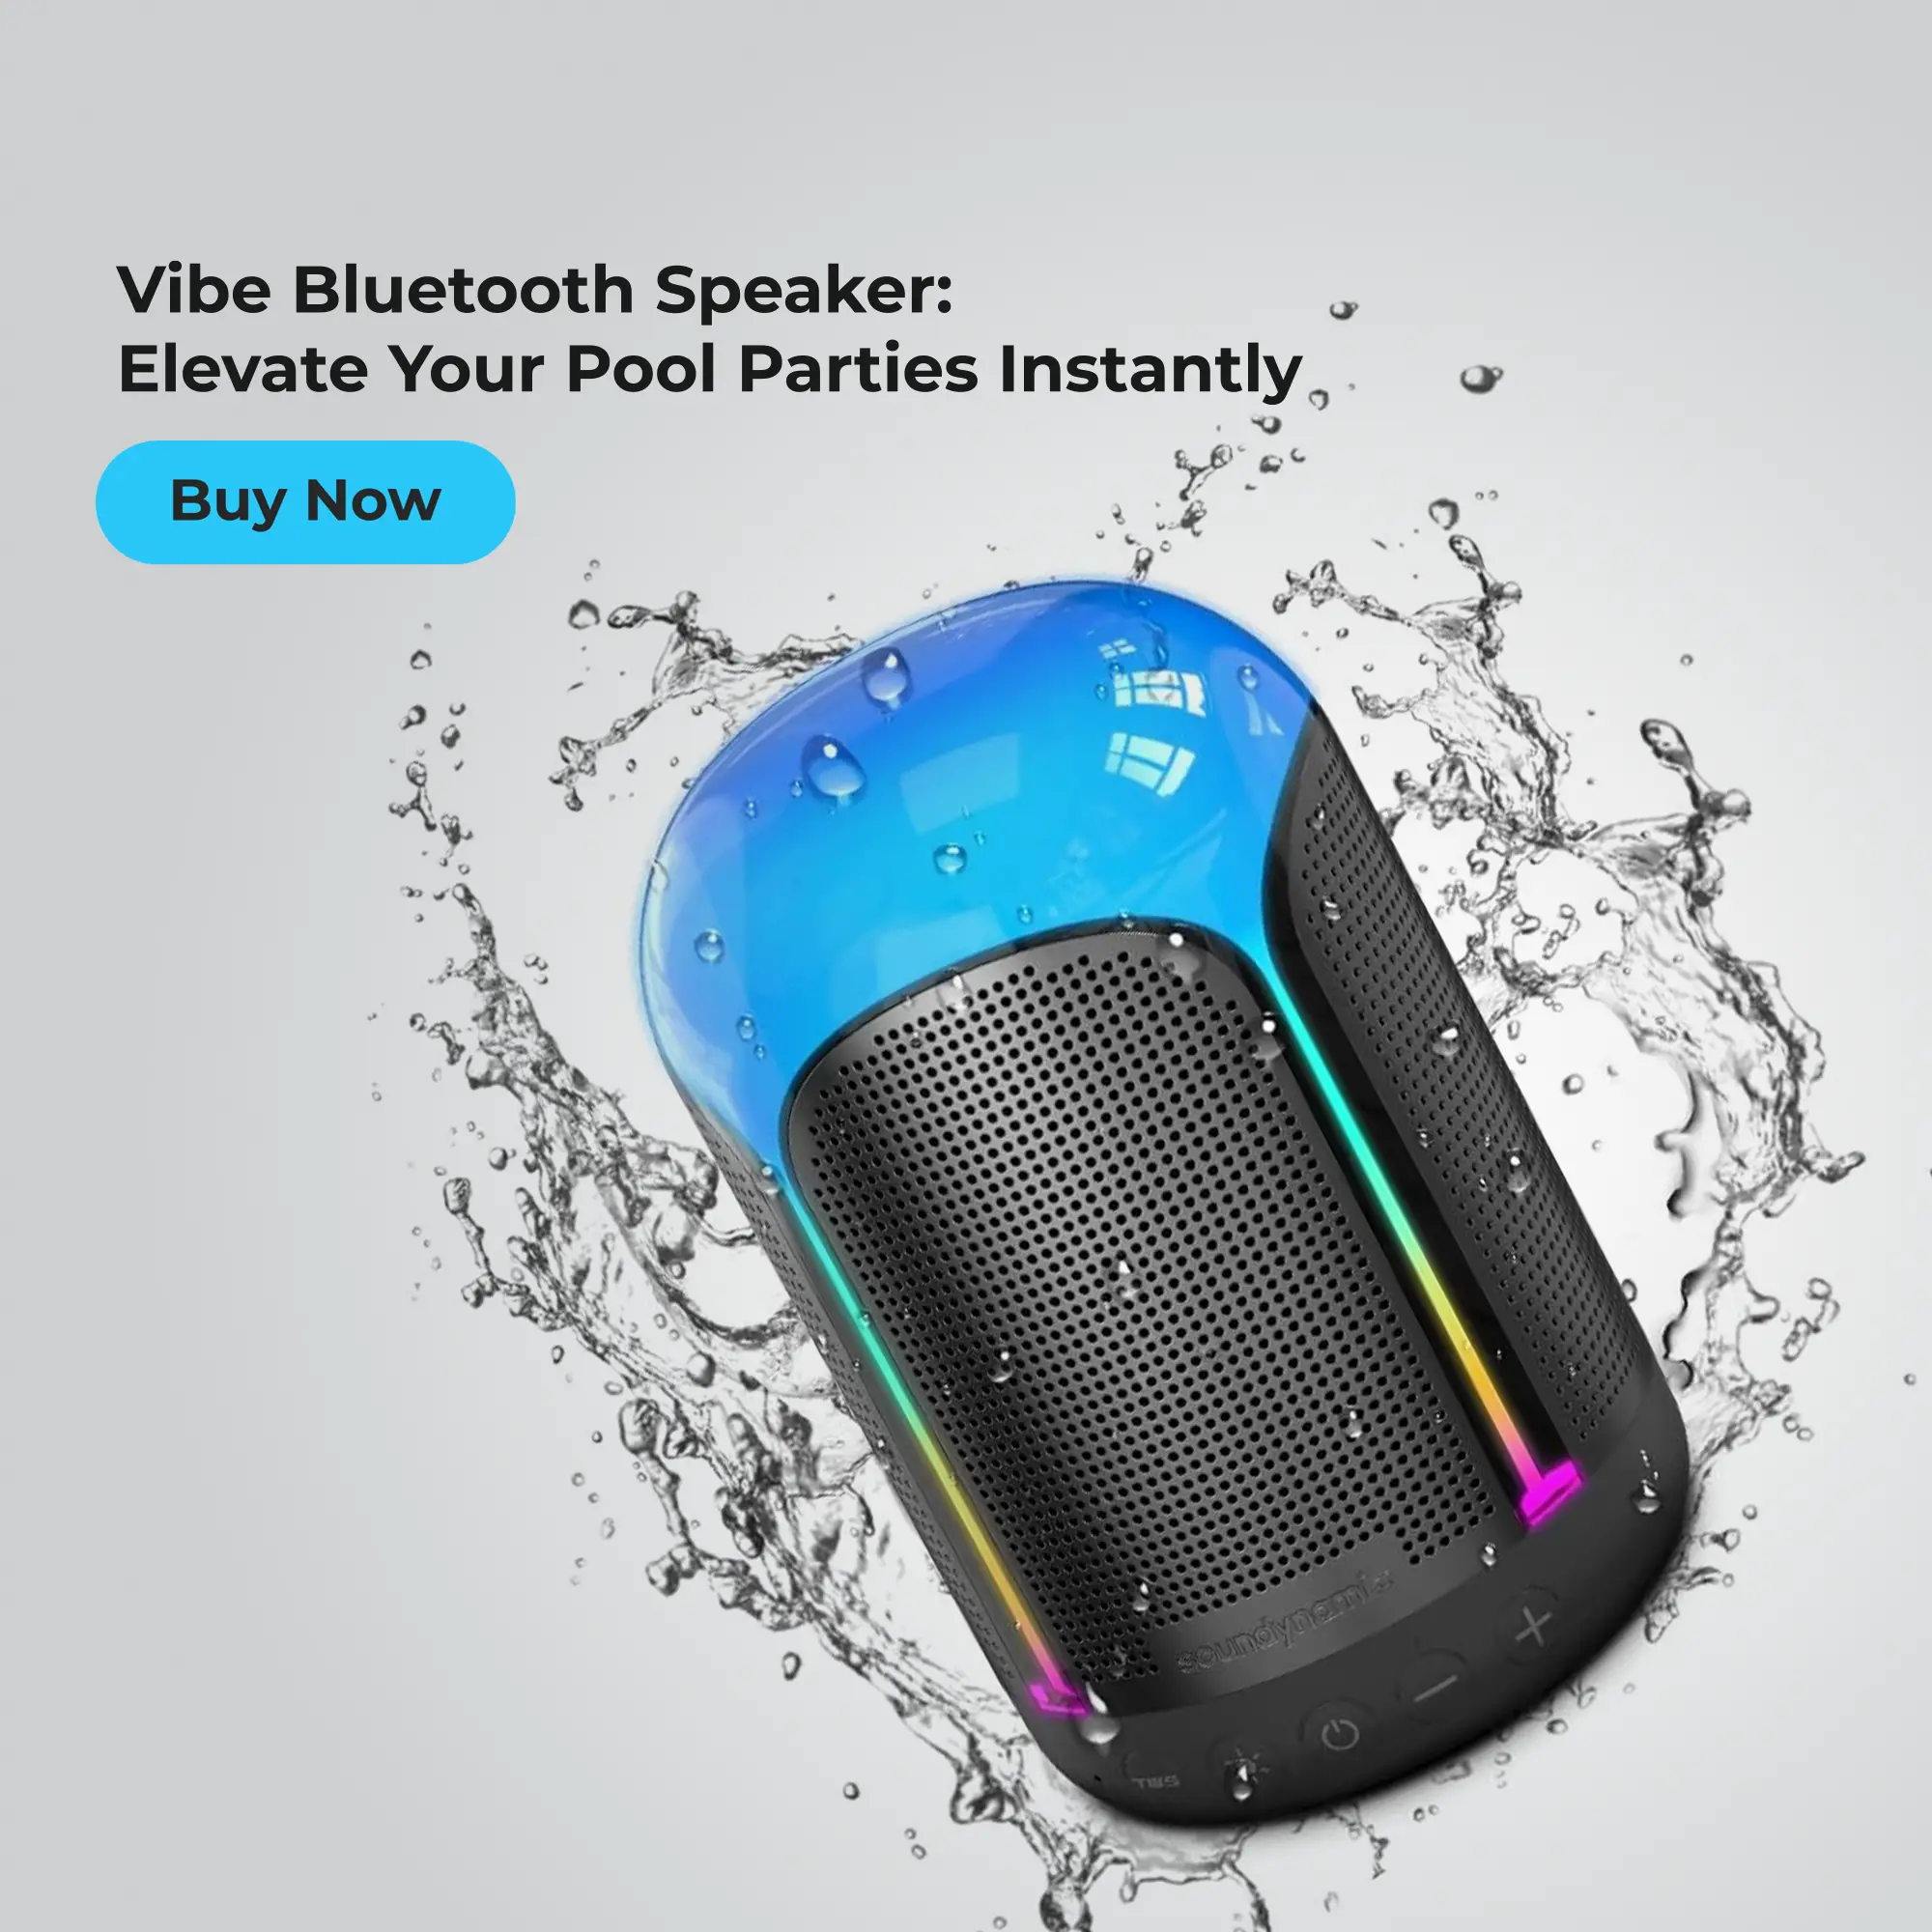 Vibe Portable Bluetooth Speaker image Techie Trickle